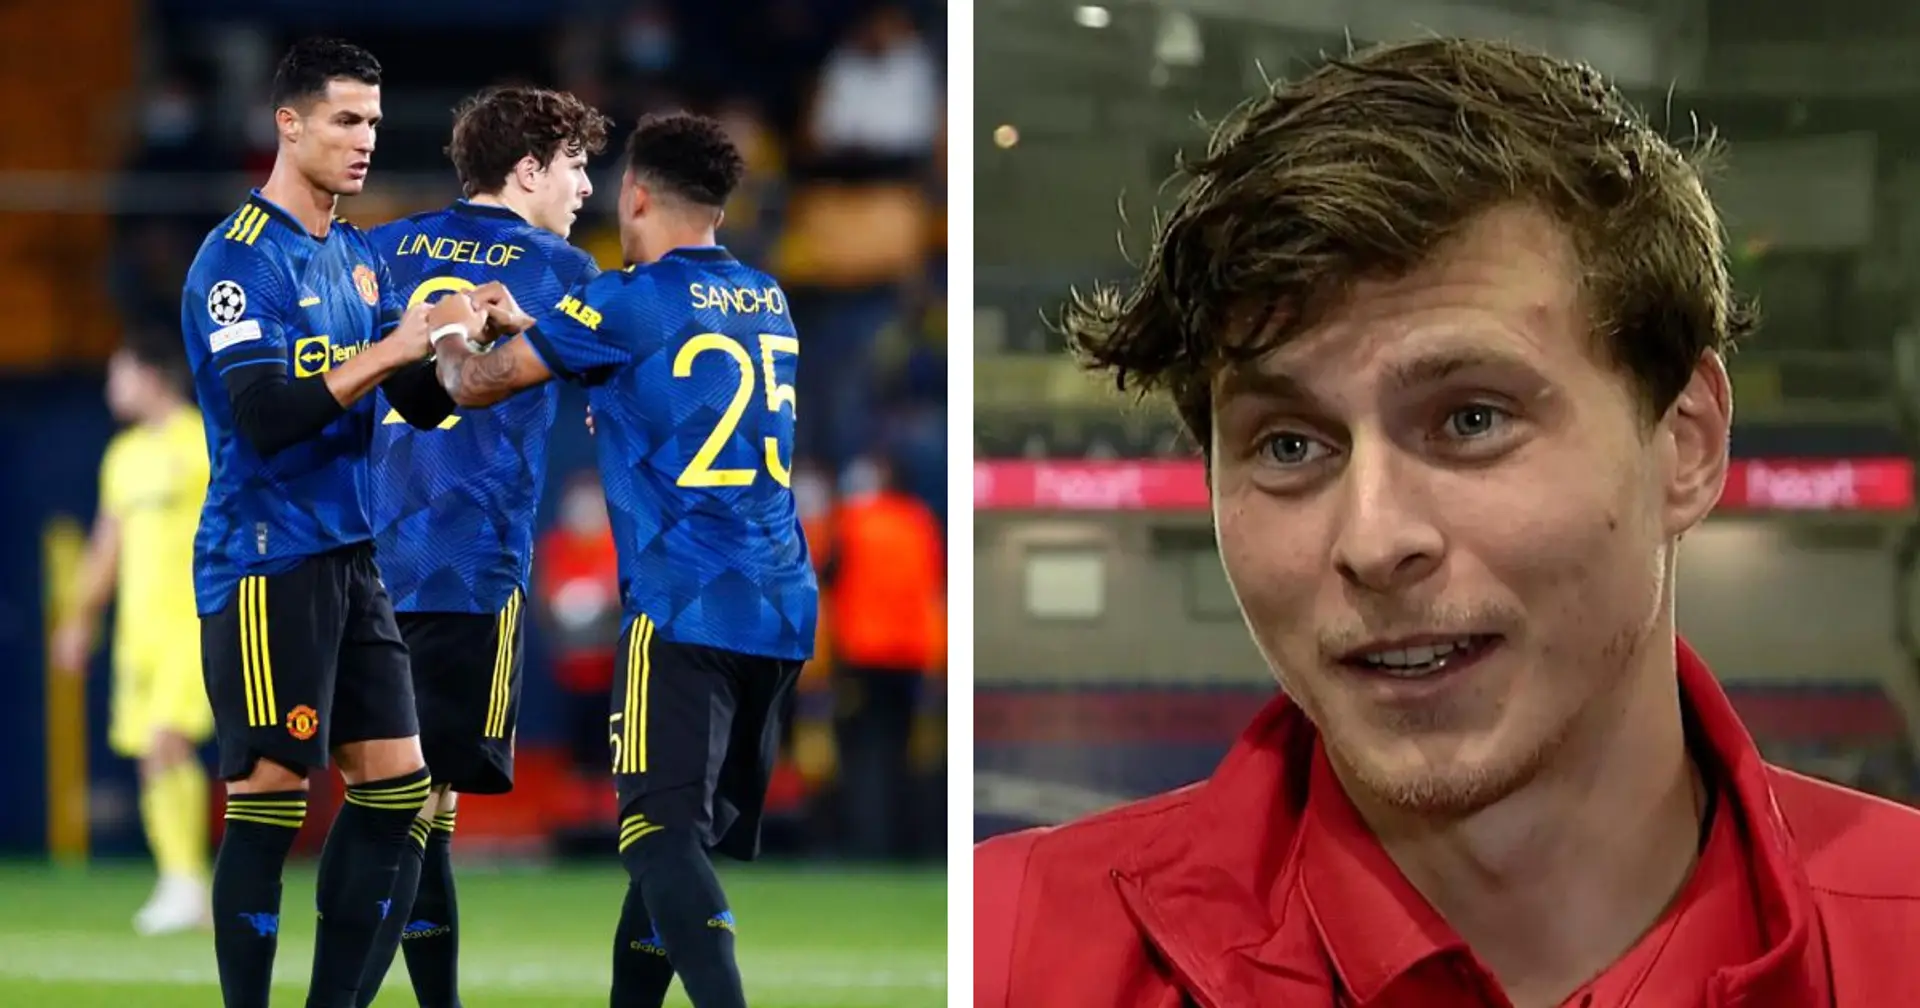 'We haven’t kept a clean sheet in a long time': Victor Lindelof opens up on 'amazing' Villarreal win